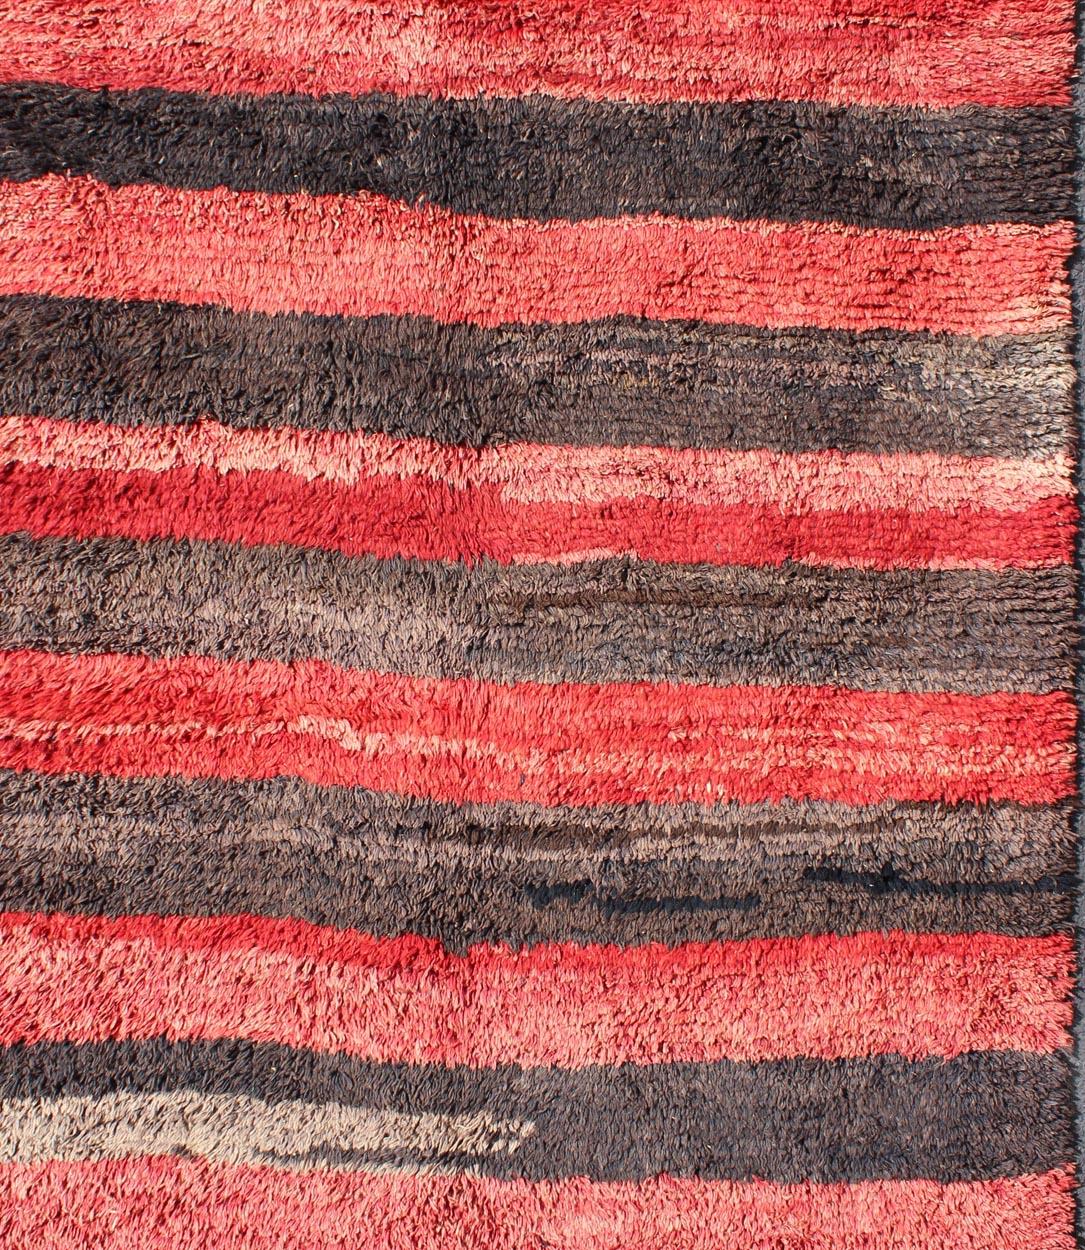 Vintage Tulu rug from Turkey in charcoal and red with stripe design, Minimalist design, Keivan Woven Arts/ rug EN-1042, country of origin / type: Turkey / Tulu, circa 1950.

Measures: 5'5 x 7'7.

This high pile shaggy Tulu rug from mid 20th century,